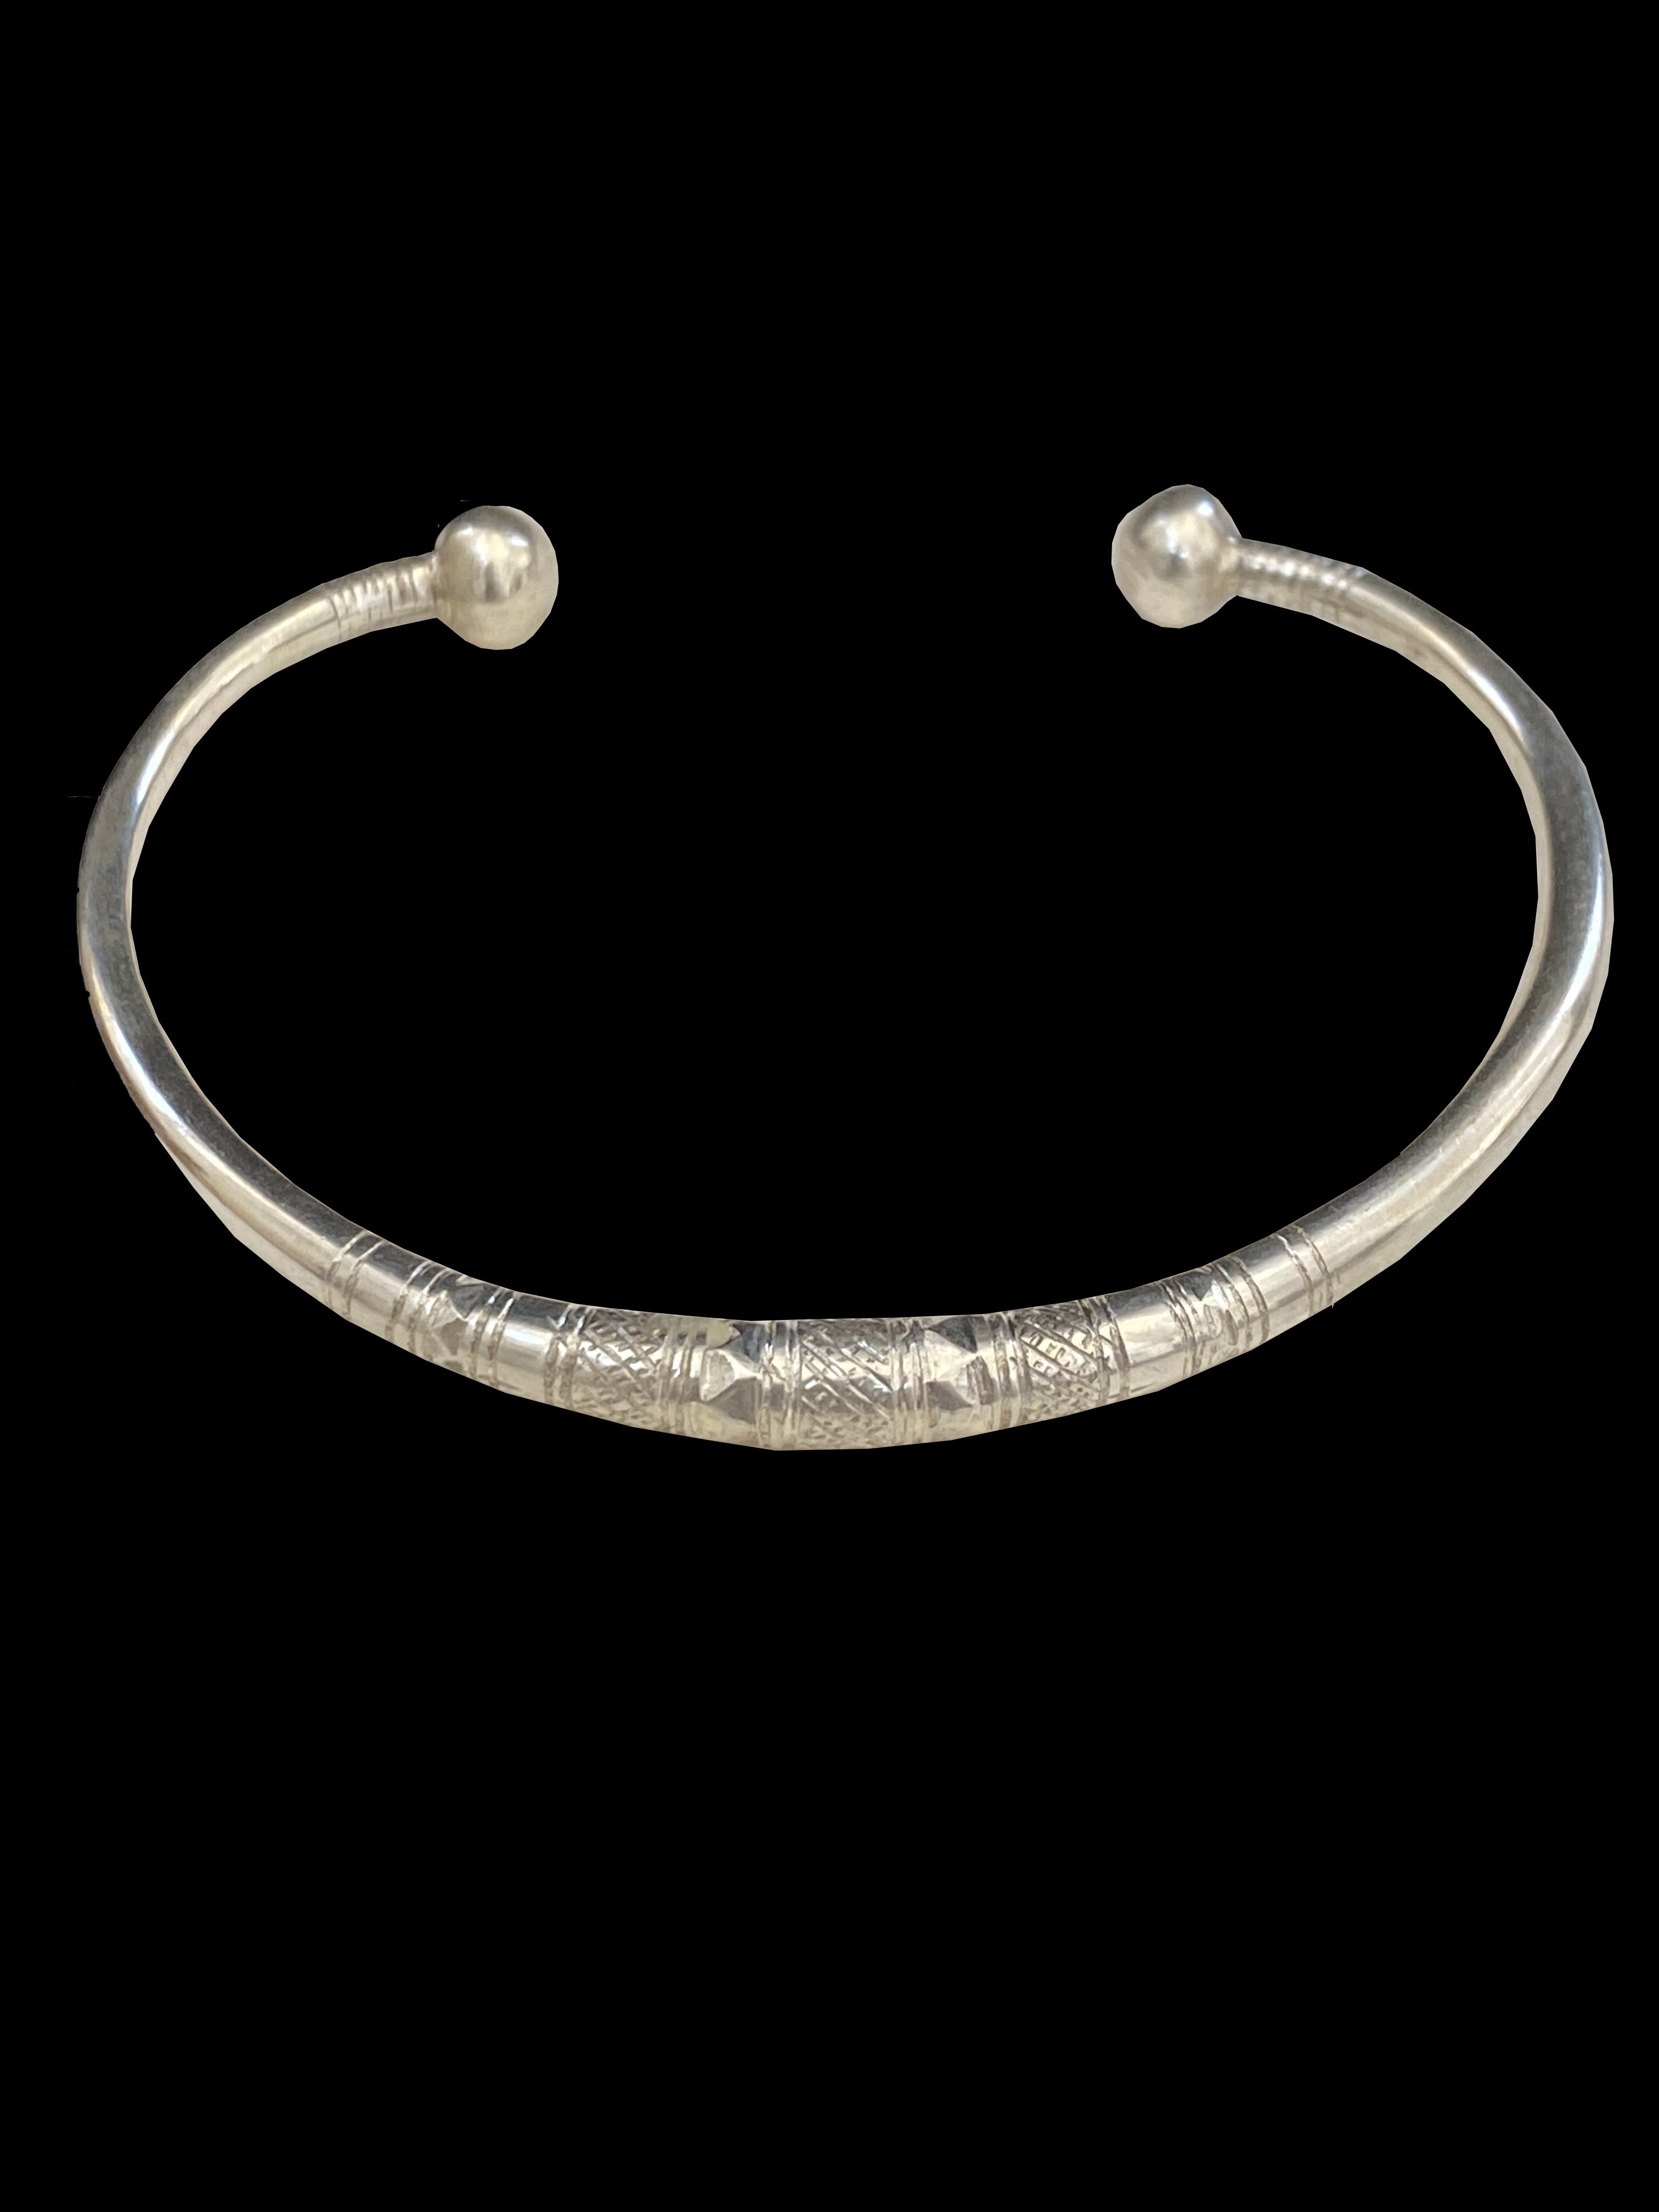 Thin Sterling Silver Bracelet - Tuareg People, nomads of the south Sahara.